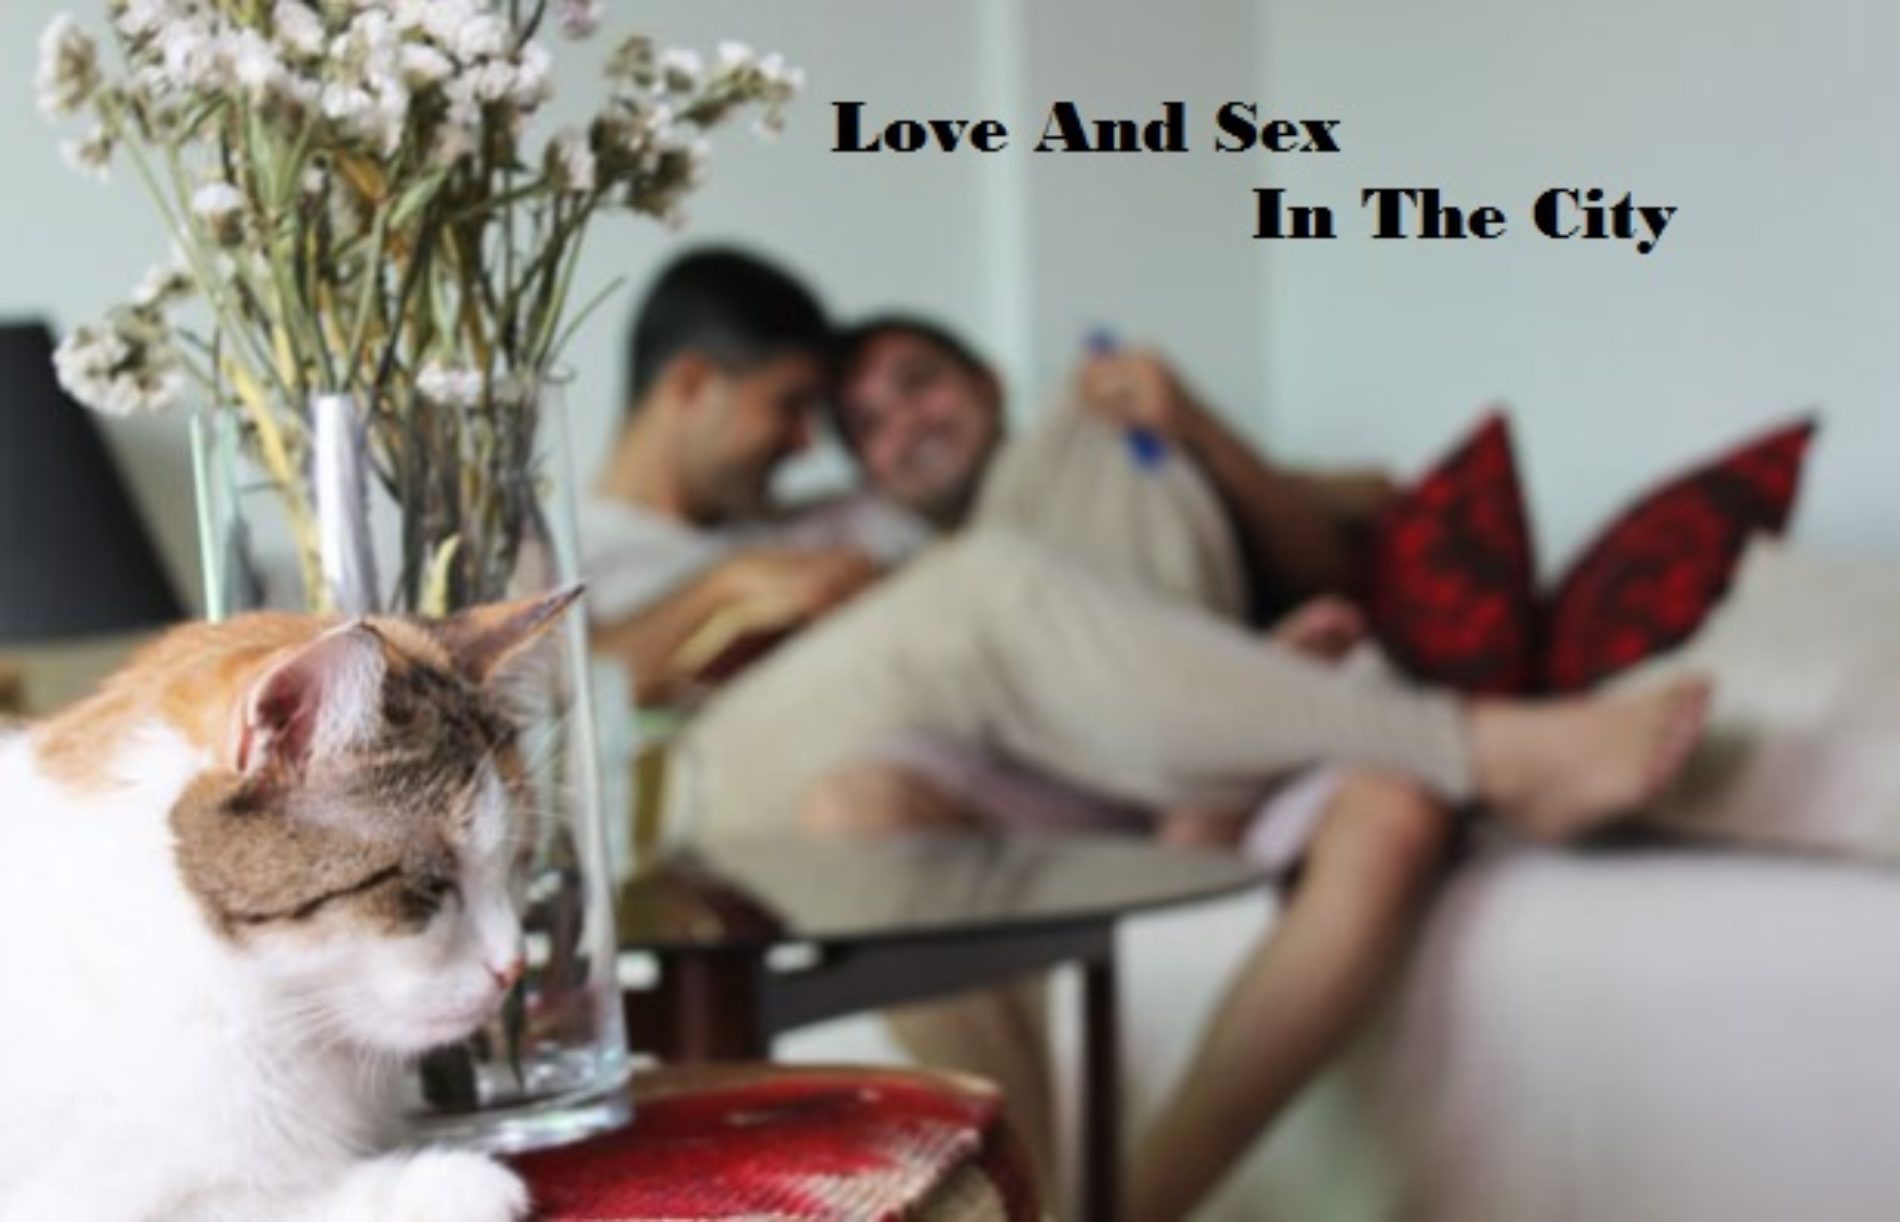 LOVE AND SEX IN THE CITY (Episode 48)